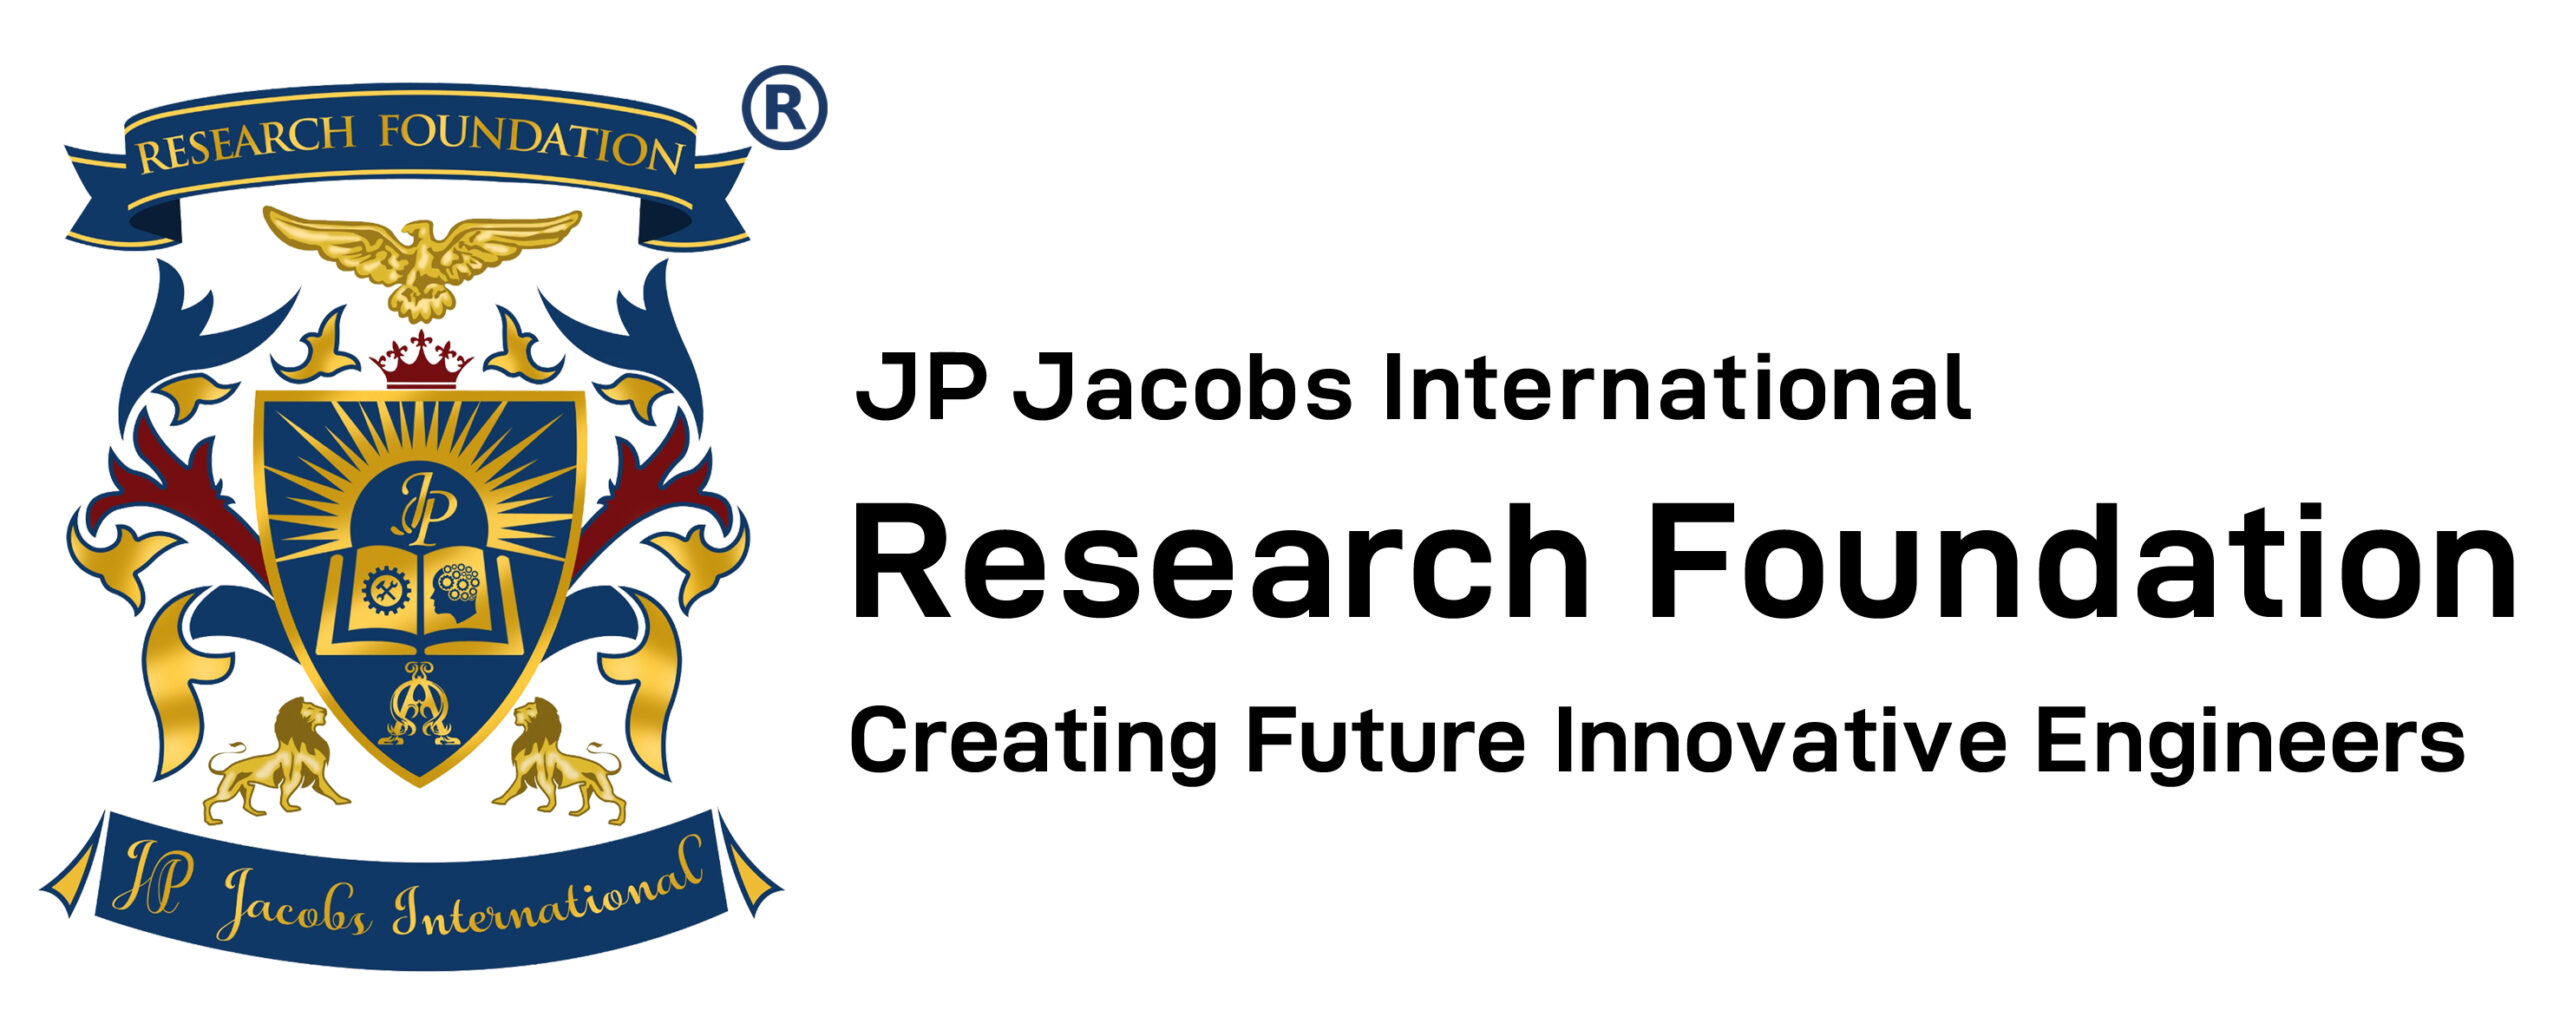 JP Jacobs International Research Foundation